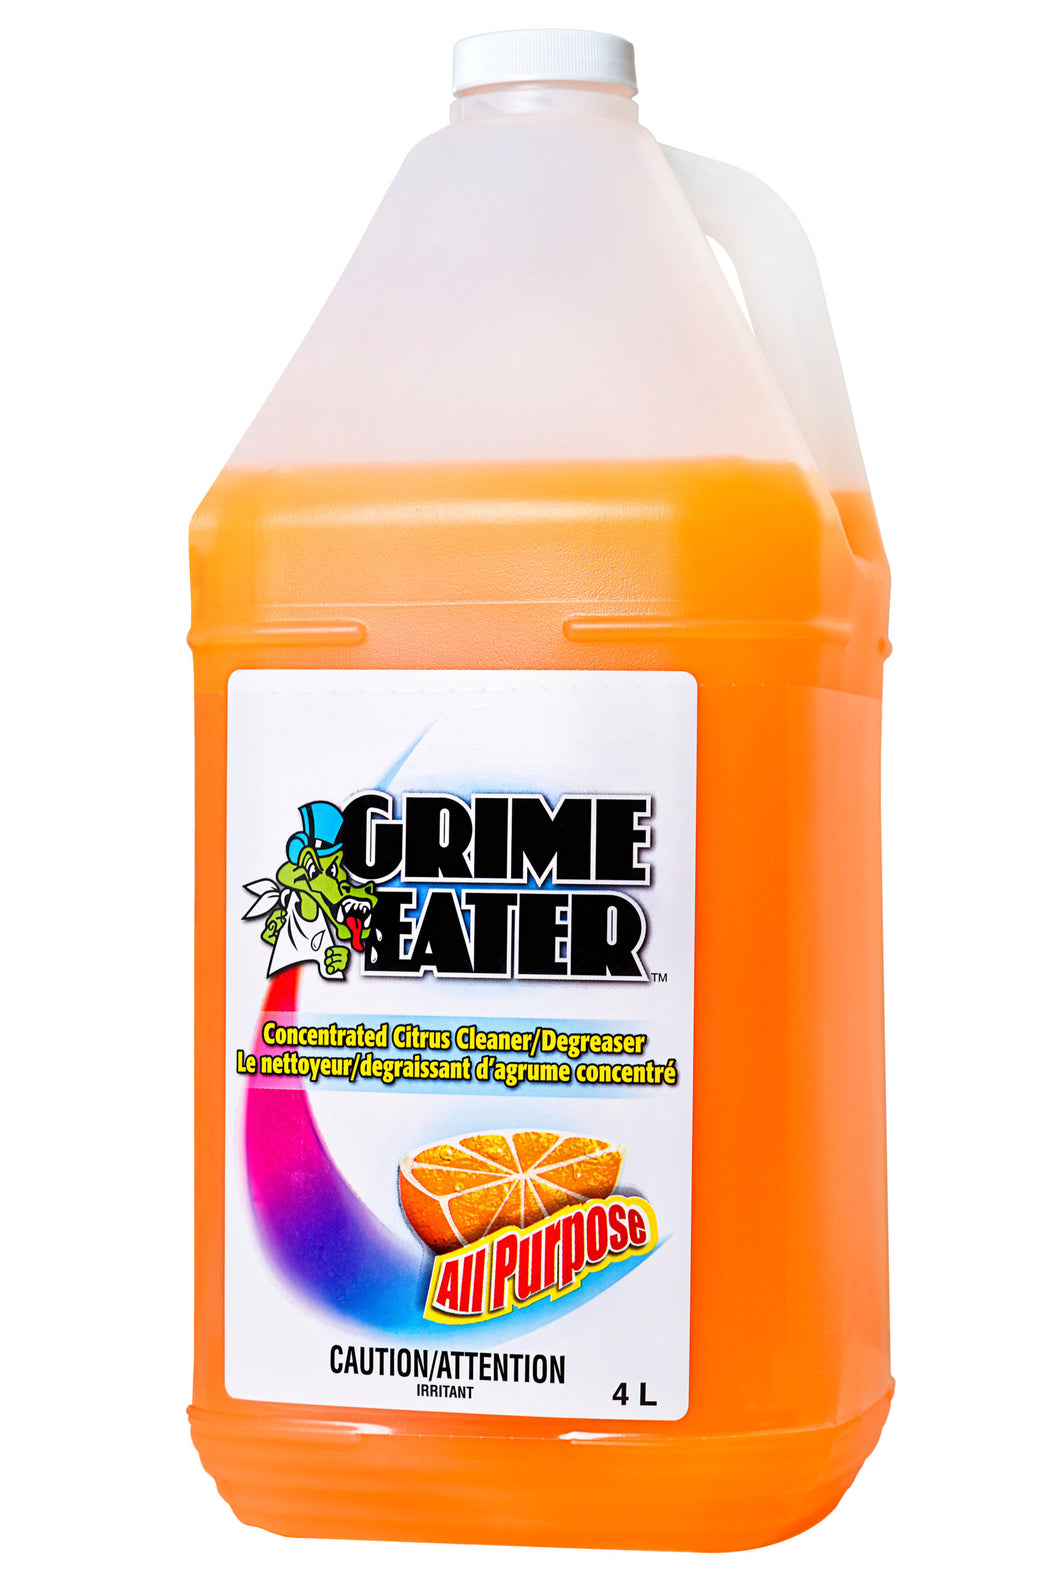 GRIME EATER® All Purpose Concentrated Citrus Cleaner & Degreaser